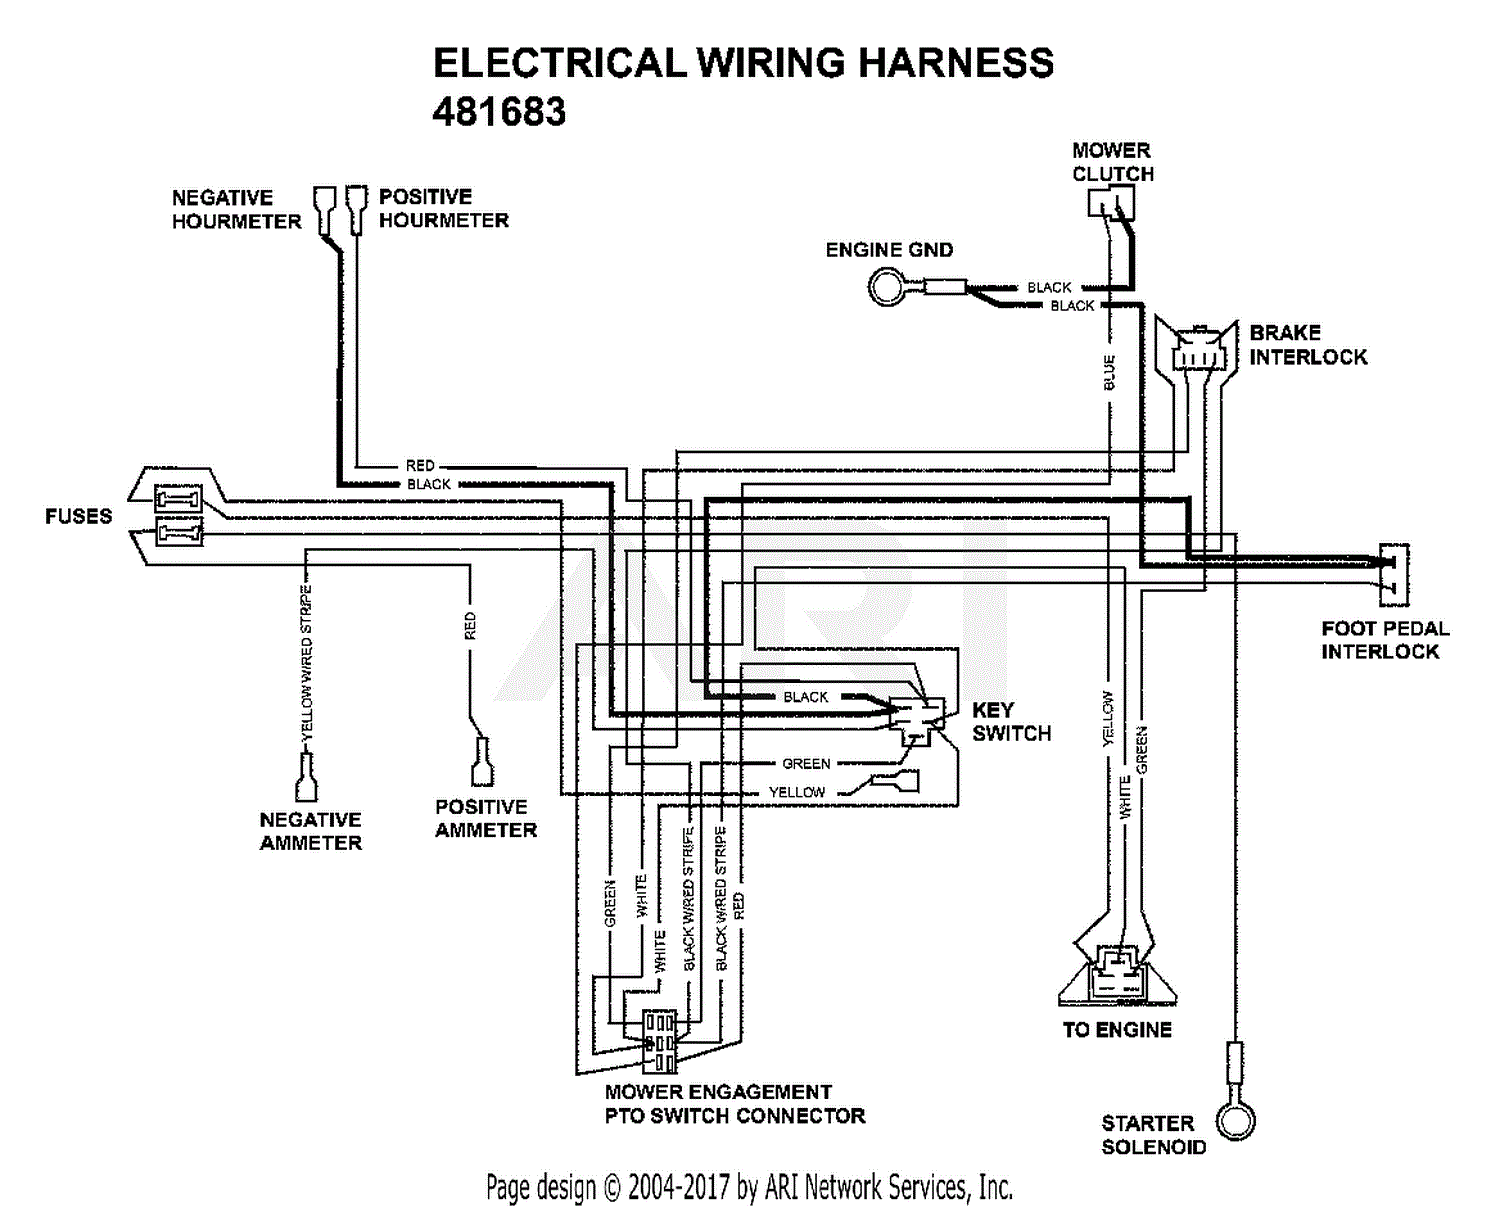 E46 Wiring Harness Diagram from az417944.vo.msecnd.net